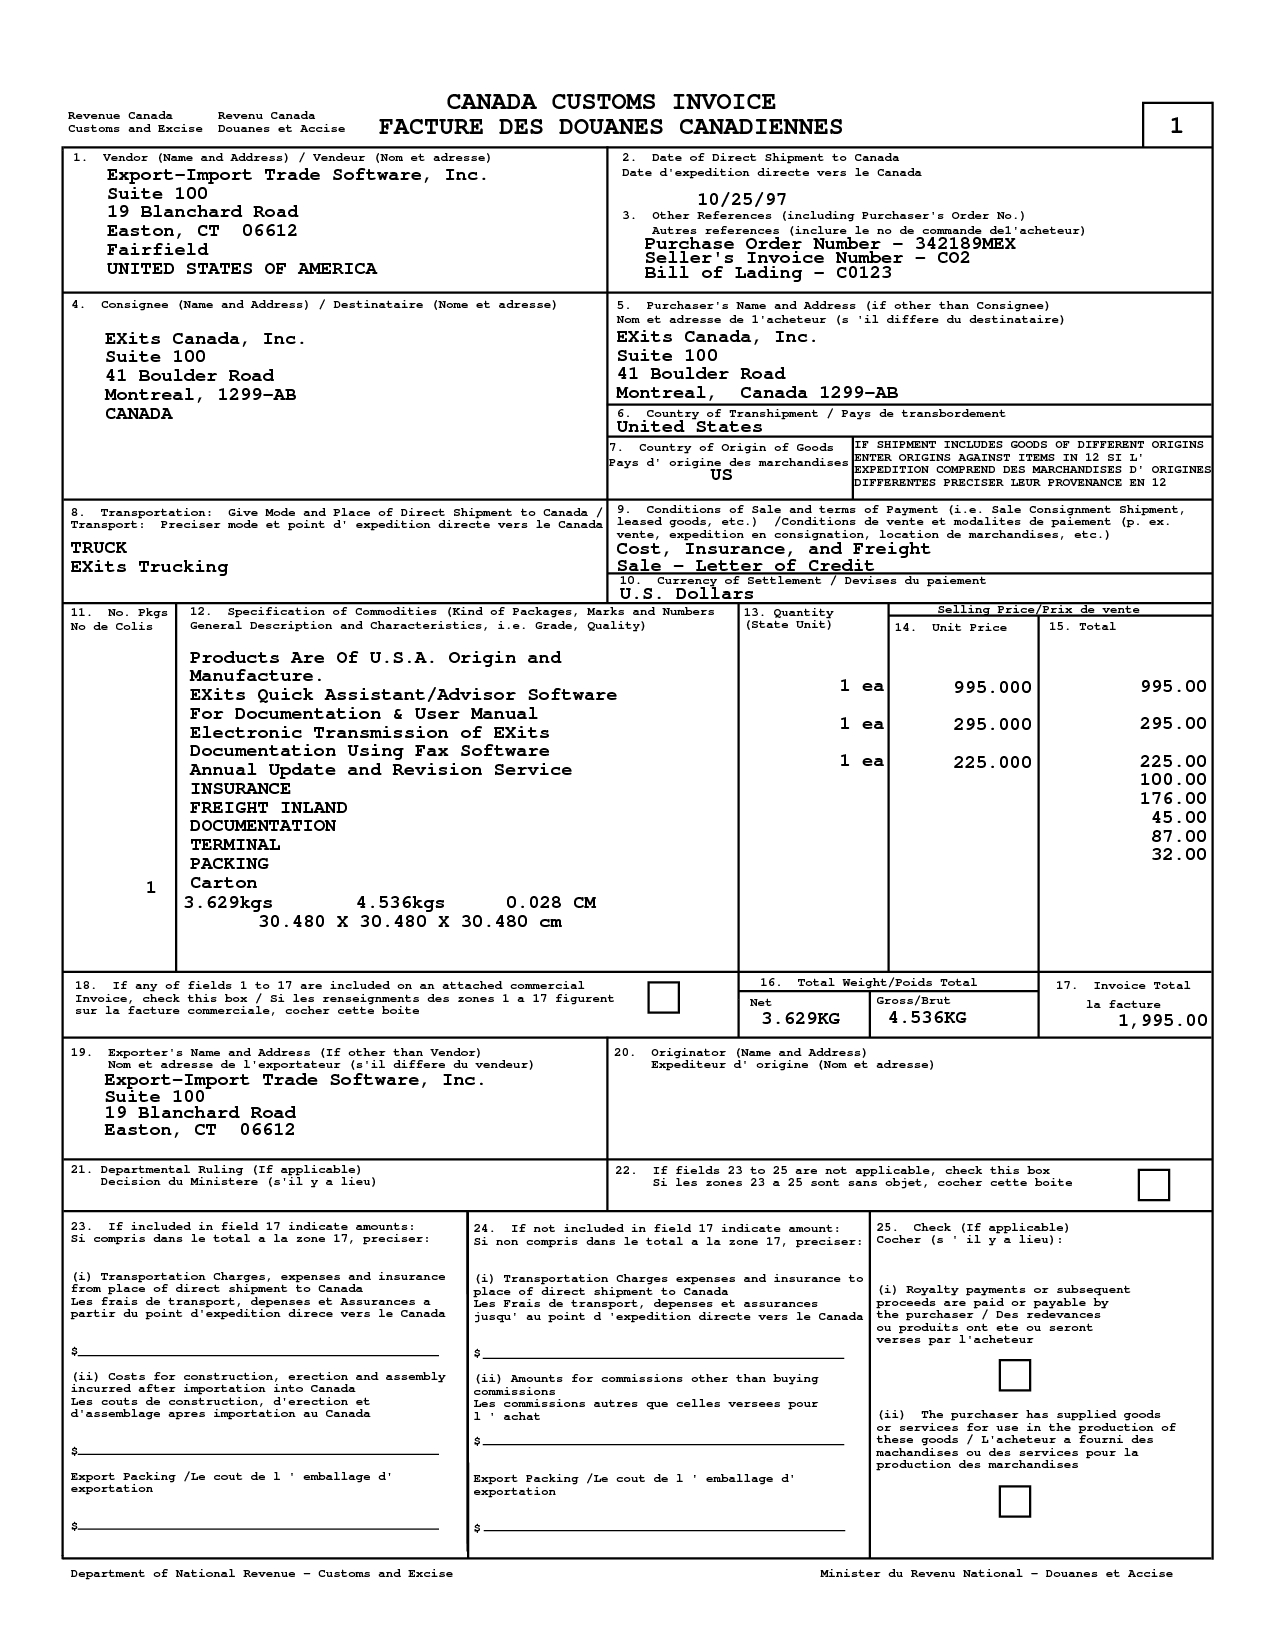 Canadian Customs Invoice Instructions * Invoice Template Ideas